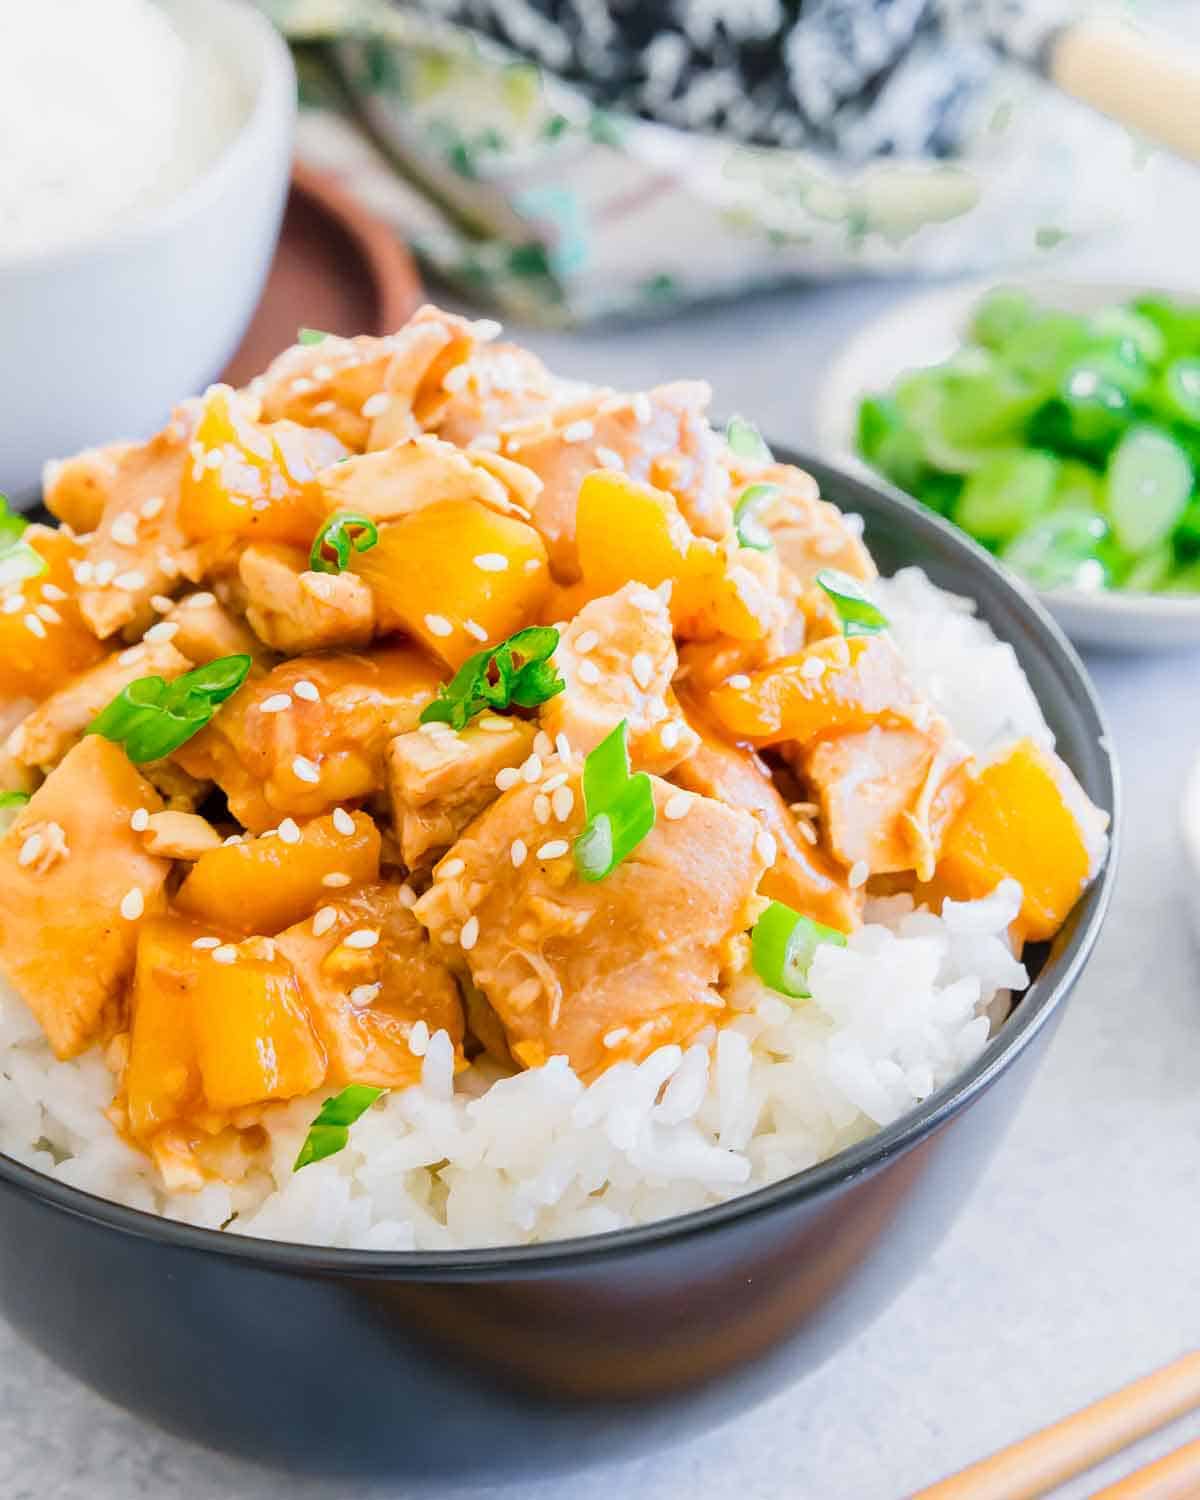 This slow cooker honey garlic chicken recipe will easily become a family favorite with classic "take-out" flavor combinations in a sticky sweet, addicting sauce.